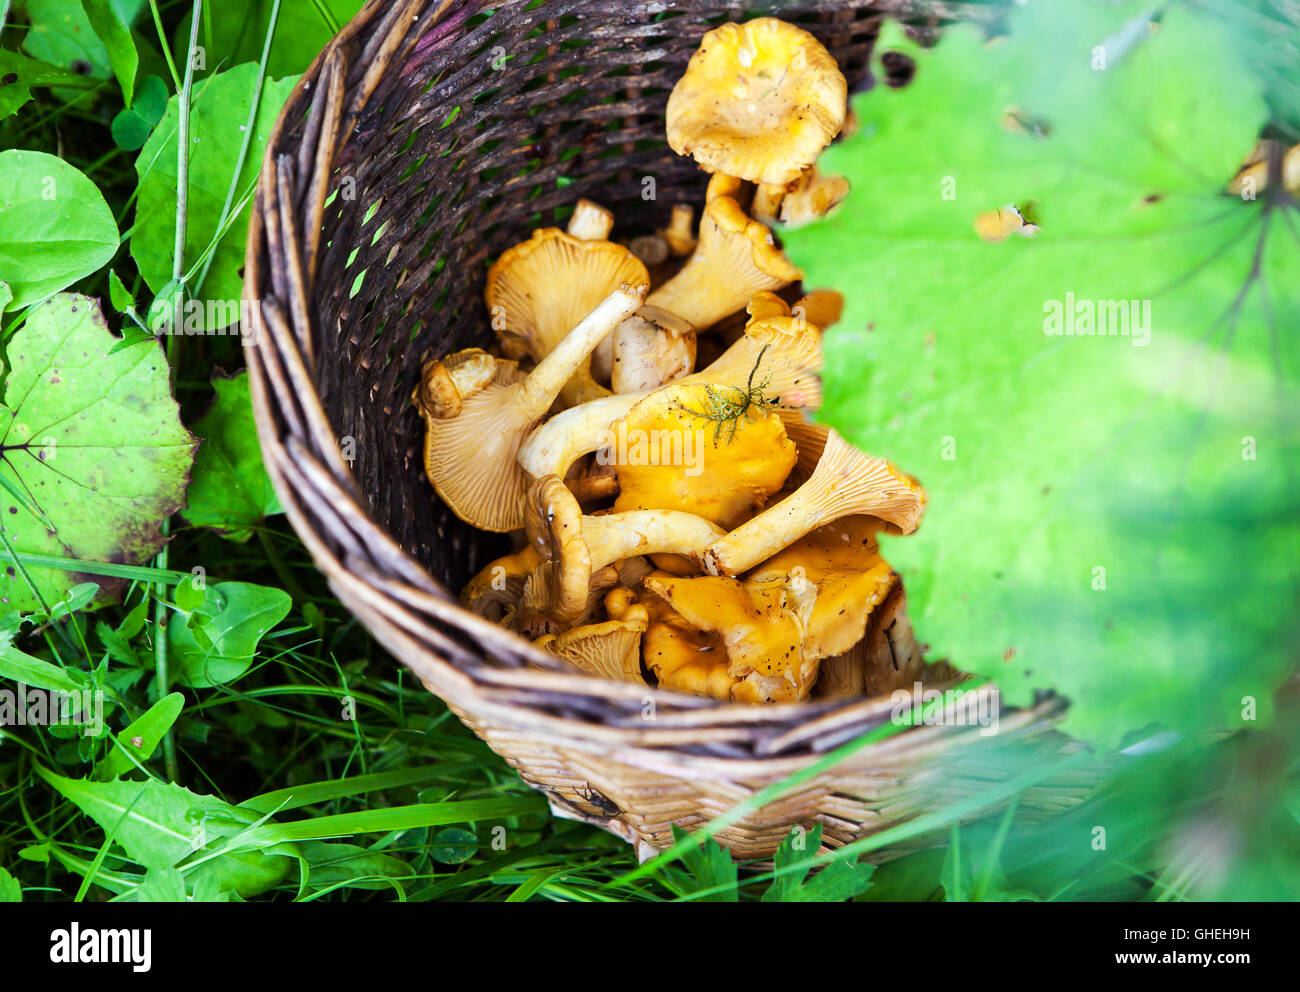 Basket of freshly harvested chanterelles mushrooms on grass in forest Stock Photo